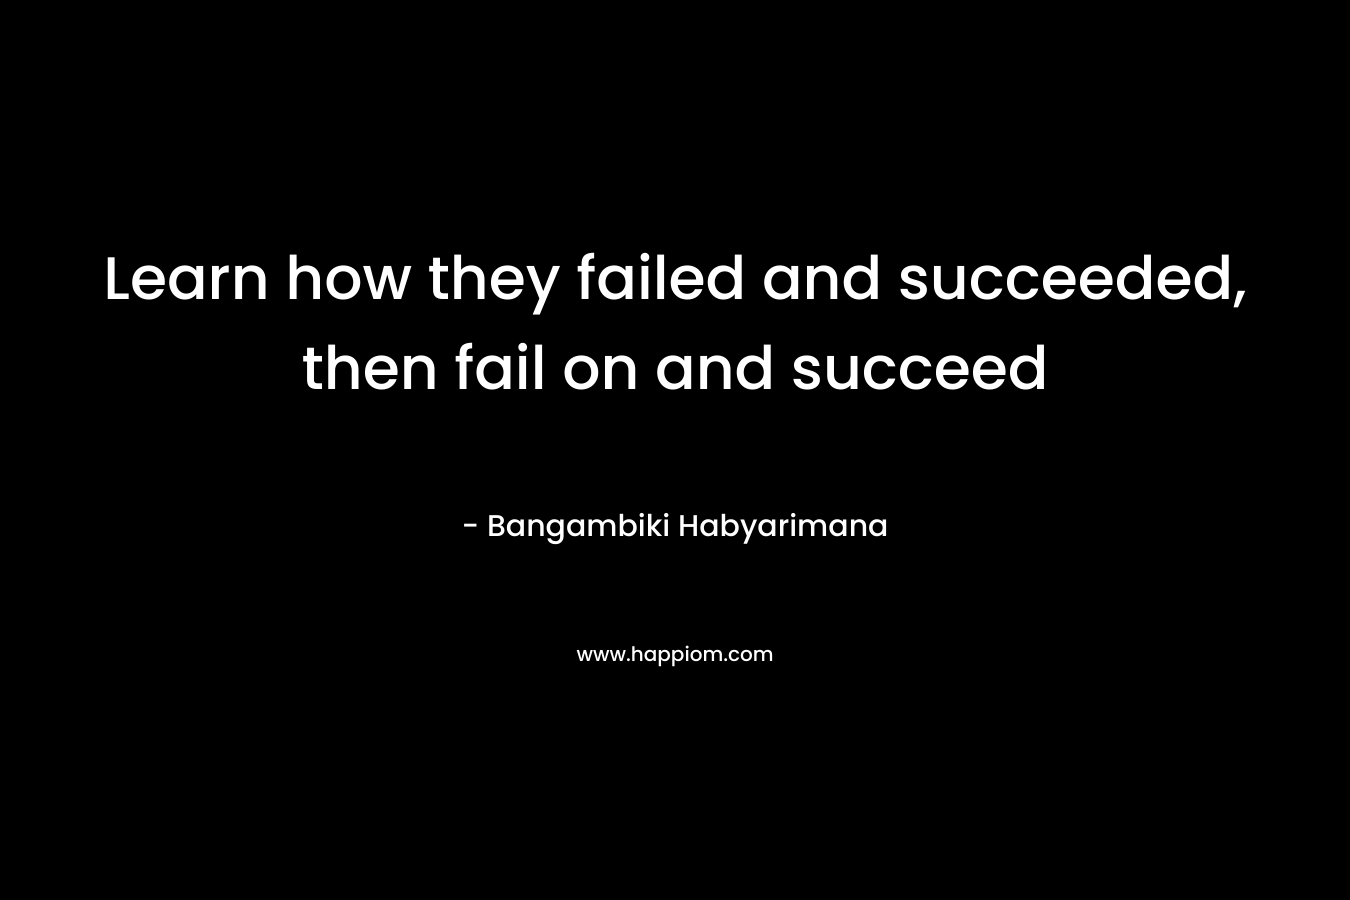 Learn how they failed and succeeded, then fail on and succeed